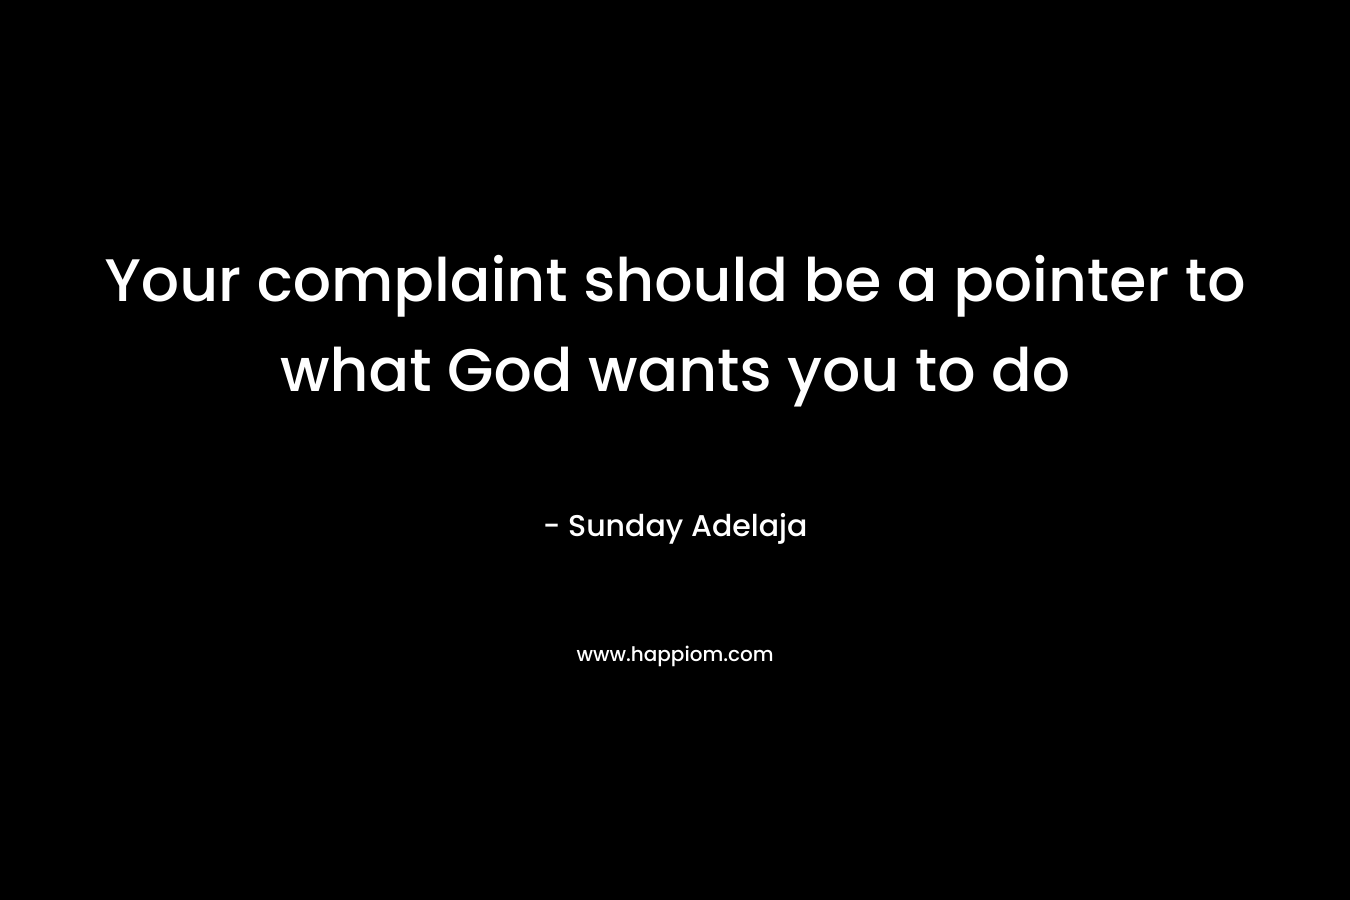 Your complaint should be a pointer to what God wants you to do